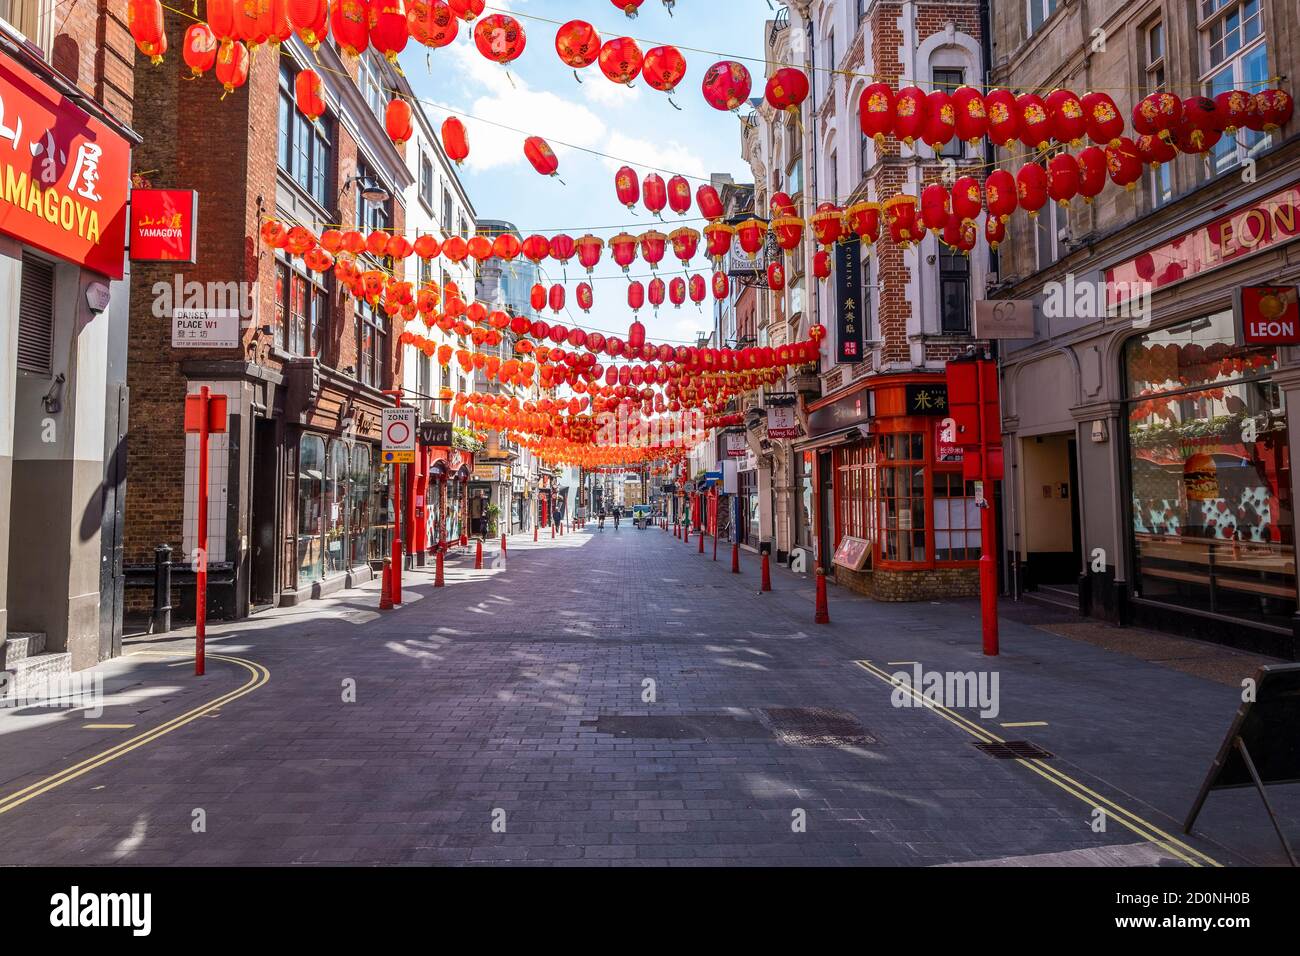 Deserted China Town in London during the pandemic lockdown. Stock Photo